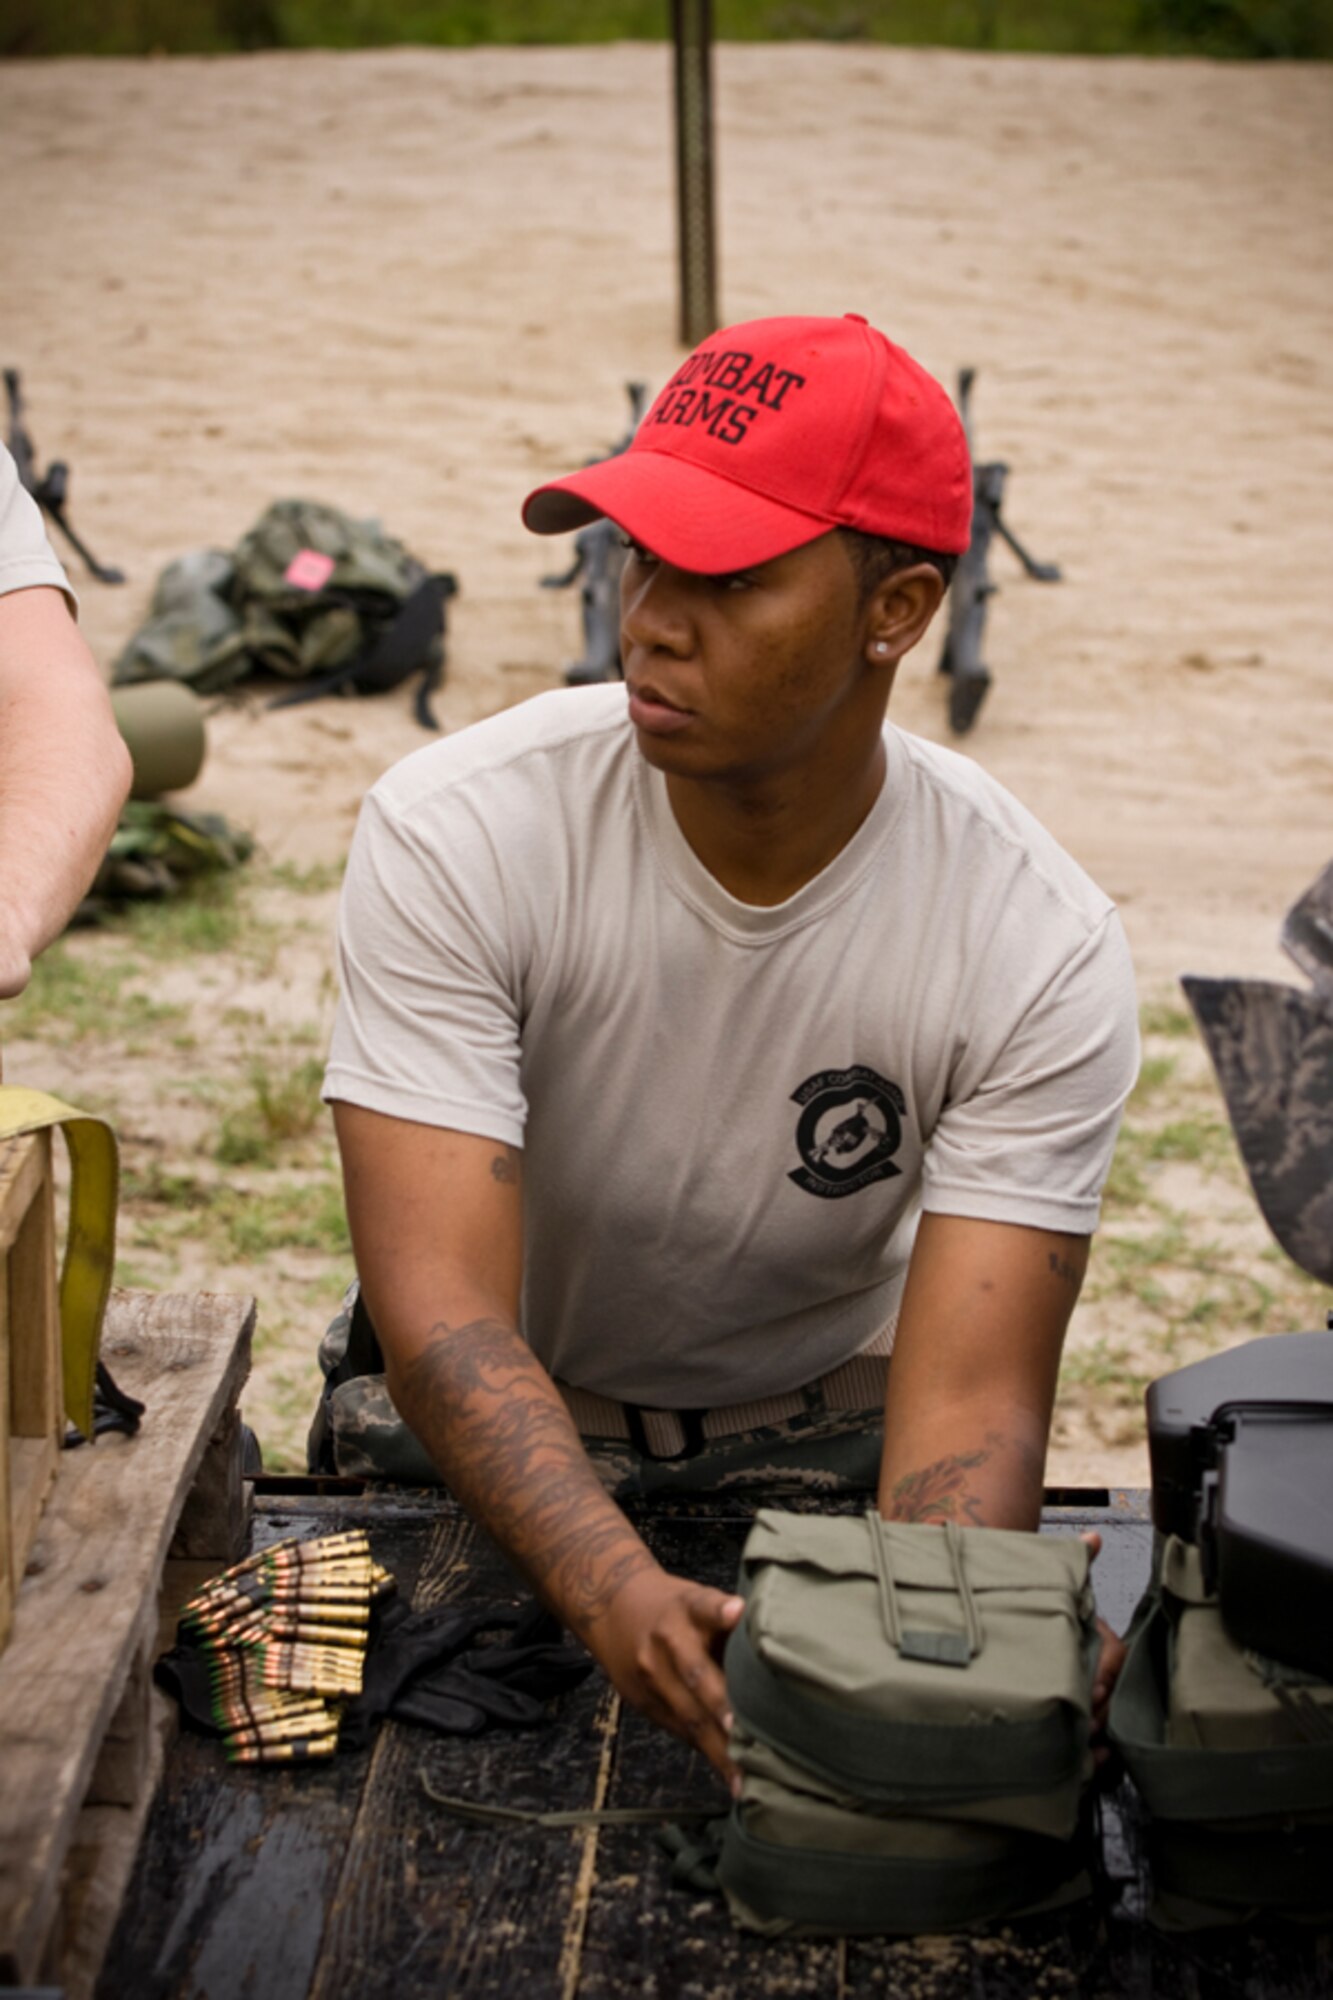 Tech Sgt. Sharese Junious offloads a 5.56mm ammo pouch which will accompany the M249 firing positions. Members of the 459th Security Forces Squadron completed their annual heavy weapons training at Fort AP Hill over the June UTA. (U.S. Air Force Photo/ Capt. Nick Strocchia)